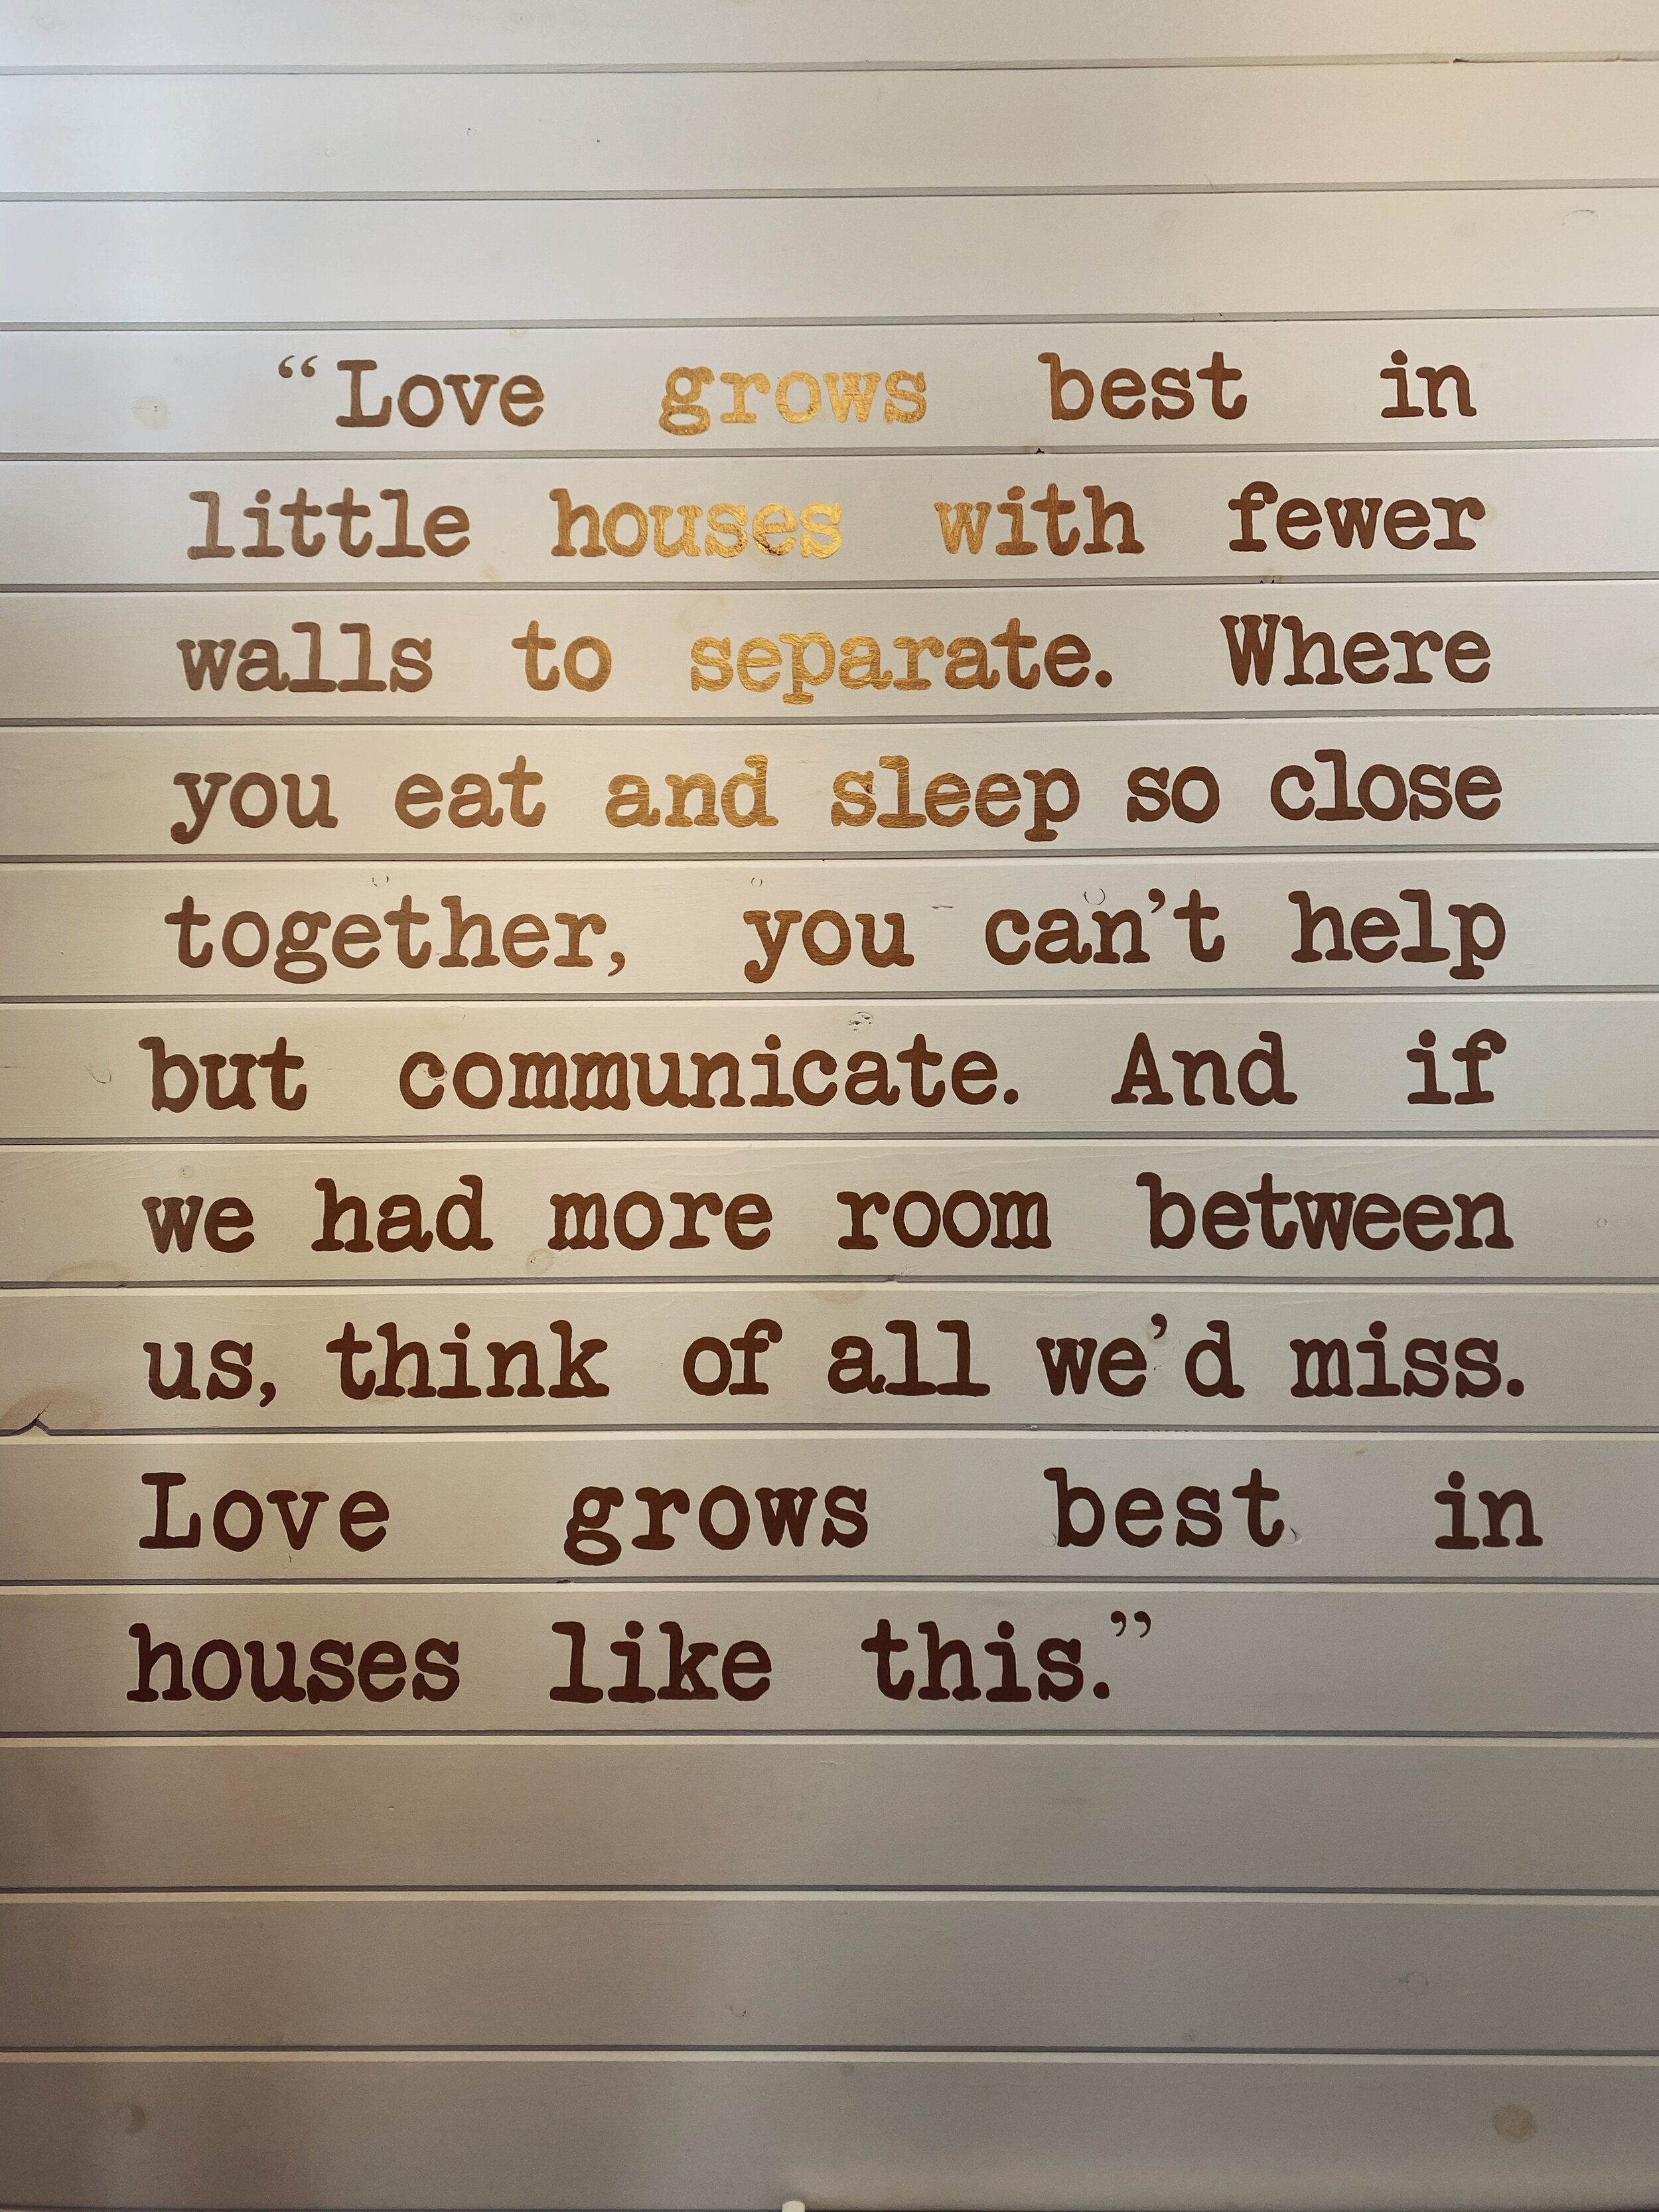 Tiny house wall art - loves grows best in tiny houses (Copy)